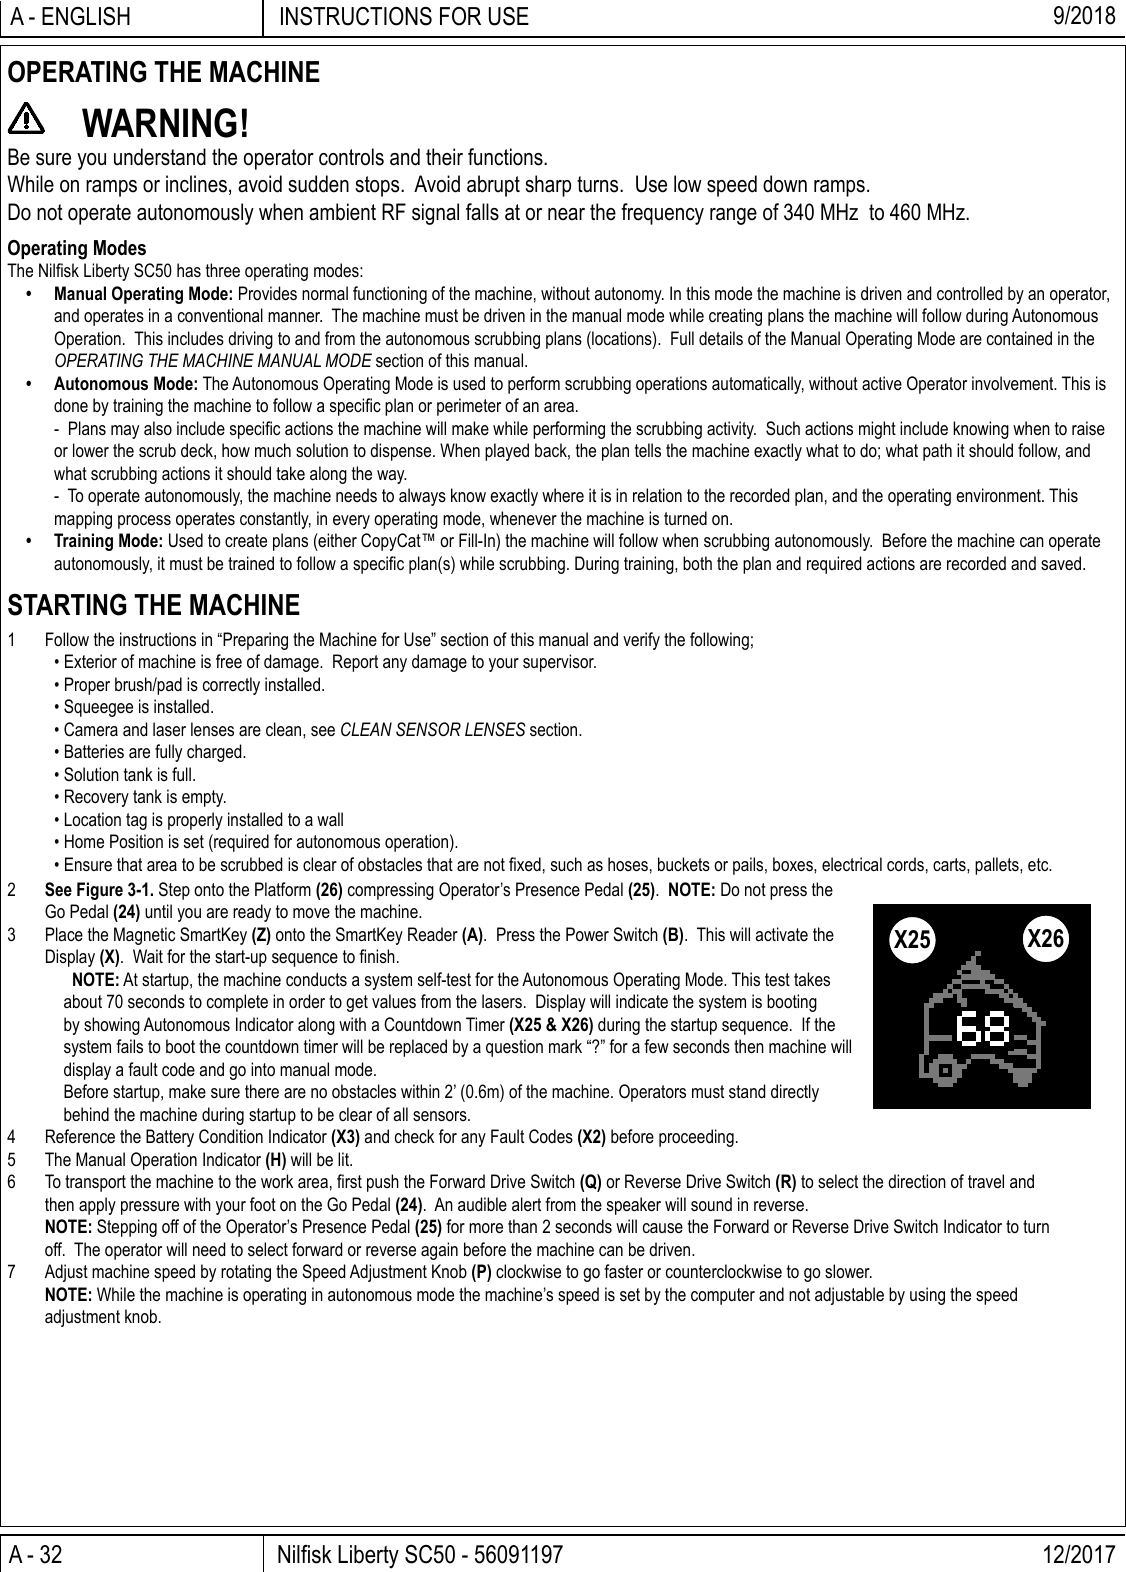 A - 32 Nilﬁ sk Liberty SC50 - 56091197 12/2017INSTRUCTIONS FOR USEA - ENGLISH 9/20182  See Figure 3-1. Step onto the Platform (26) compressing Operator’s Presence Pedal (25).  NOTE: Do not press the Go Pedal (24) until you are ready to move the machine.3  Place the Magnetic SmartKey (Z) onto the SmartKey Reader (A).  Press the Power Switch (B).  This will activate the Display (X).  Wait for the start-up sequence to ﬁ nish.   NOTE: At startup, the machine conducts a system self-test for the Autonomous Operating Mode. This test takes about 70 seconds to complete in order to get values from the lasers.  Display will indicate the system is booting by showing Autonomous Indicator along with a Countdown Timer (X25 &amp; X26) during the startup sequence.  If the system fails to boot the countdown timer will be replaced by a question mark “?” for a few seconds then machine will display a fault code and go into manual mode.  Before startup, make sure there are no obstacles within 2’ (0.6m) of the machine. Operators must stand directly behind the machine during startup to be clear of all sensors.4  Reference the Battery Condition Indicator (X3) and check for any Fault Codes (X2) before proceeding.5  The Manual Operation Indicator (H) will be lit.6  To transport the machine to the work area, ﬁ rst push the Forward Drive Switch (Q) or Reverse Drive Switch (R) to select the direction of travel and then apply pressure with your foot on the Go Pedal (24).  An audible alert from the speaker will sound in reverse. NOTE: Stepping off of the Operator’s Presence Pedal (25) for more than 2 seconds will cause the Forward or Reverse Drive Switch Indicator to turn off.  The operator will need to select forward or reverse again before the machine can be driven.7  Adjust machine speed by rotating the Speed Adjustment Knob (P) clockwise to go faster or counterclockwise to go slower. NOTE: While the machine is operating in autonomous mode the machine’s speed is set by the computer and not adjustable by using the speed adjustment knob.OPERATING THE MACHINE WARNING!Be sure you understand the operator controls and their functions.While on ramps or inclines, avoid sudden stops.  Avoid abrupt sharp turns.  Use low speed down ramps.Do not operate autonomously when ambient RF signal falls at or near the frequency range of 340 MHz  to 460 MHz.Operating ModesThe Nilﬁ sk Liberty SC50 has three operating modes:•  Manual Operating Mode: Provides normal functioning of the machine, without autonomy. In this mode the machine is driven and controlled by an operator, and operates in a conventional manner.  The machine must be driven in the manual mode while creating plans the machine will follow during Autonomous Operation.  This includes driving to and from the autonomous scrubbing plans (locations).  Full details of the Manual Operating Mode are contained in the OPERATING THE MACHINE MANUAL MODE section of this manual.• Autonomous Mode: The Autonomous Operating Mode is used to perform scrubbing operations automatically, without active Operator involvement. This is done by training the machine to follow a speciﬁ c plan or perimeter of an area.  -  Plans may also include speciﬁ c actions the machine will make while performing the scrubbing activity.  Such actions might include knowing when to raise or lower the scrub deck, how much solution to dispense. When played back, the plan tells the machine exactly what to do; what path it should follow, and what scrubbing actions it should take along the way.  -  To operate autonomously, the machine needs to always know exactly where it is in relation to the recorded plan, and the operating environment. This mapping process operates constantly, in every operating mode, whenever the machine is turned on.• Training Mode: Used to create plans (either CopyCat™ or Fill-In) the machine will follow when scrubbing autonomously.  Before the machine can operate autonomously, it must be trained to follow a speciﬁ c plan(s) while scrubbing. During training, both the plan and required actions are recorded and saved.STARTING THE MACHINE1  Follow the instructions in “Preparing the Machine for Use” section of this manual and verify the following;• Exterior of machine is free of damage.  Report any damage to your supervisor.• Proper brush/pad is correctly installed.• Squeegee is installed.• Camera and laser lenses are clean, see CLEAN SENSOR LENSES section.• Batteries are fully charged.• Solution tank is full.• Recovery tank is empty.• Location tag is properly installed to a wall• Home Position is set (required for autonomous operation).• Ensure that area to be scrubbed is clear of obstacles that are not ﬁ xed, such as hoses, buckets or pails, boxes, electrical cords, carts, pallets, etc.X25 X26